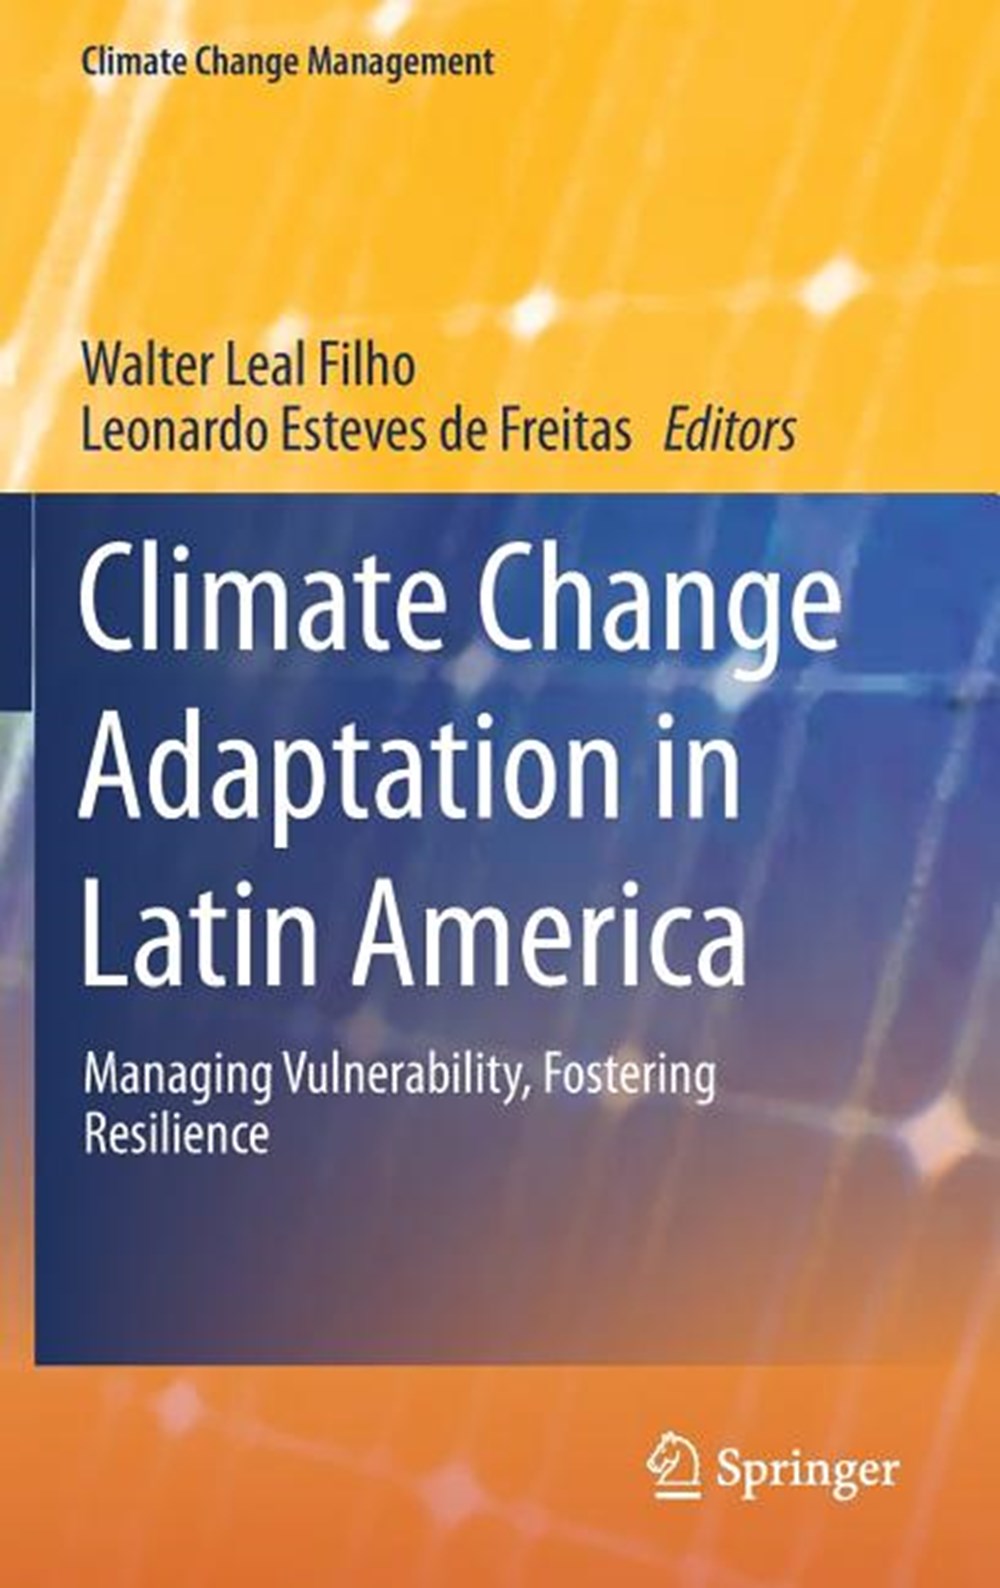 Climate Change Adaptation in Latin America: Managing Vulnerability, Fostering Resilience (2018)